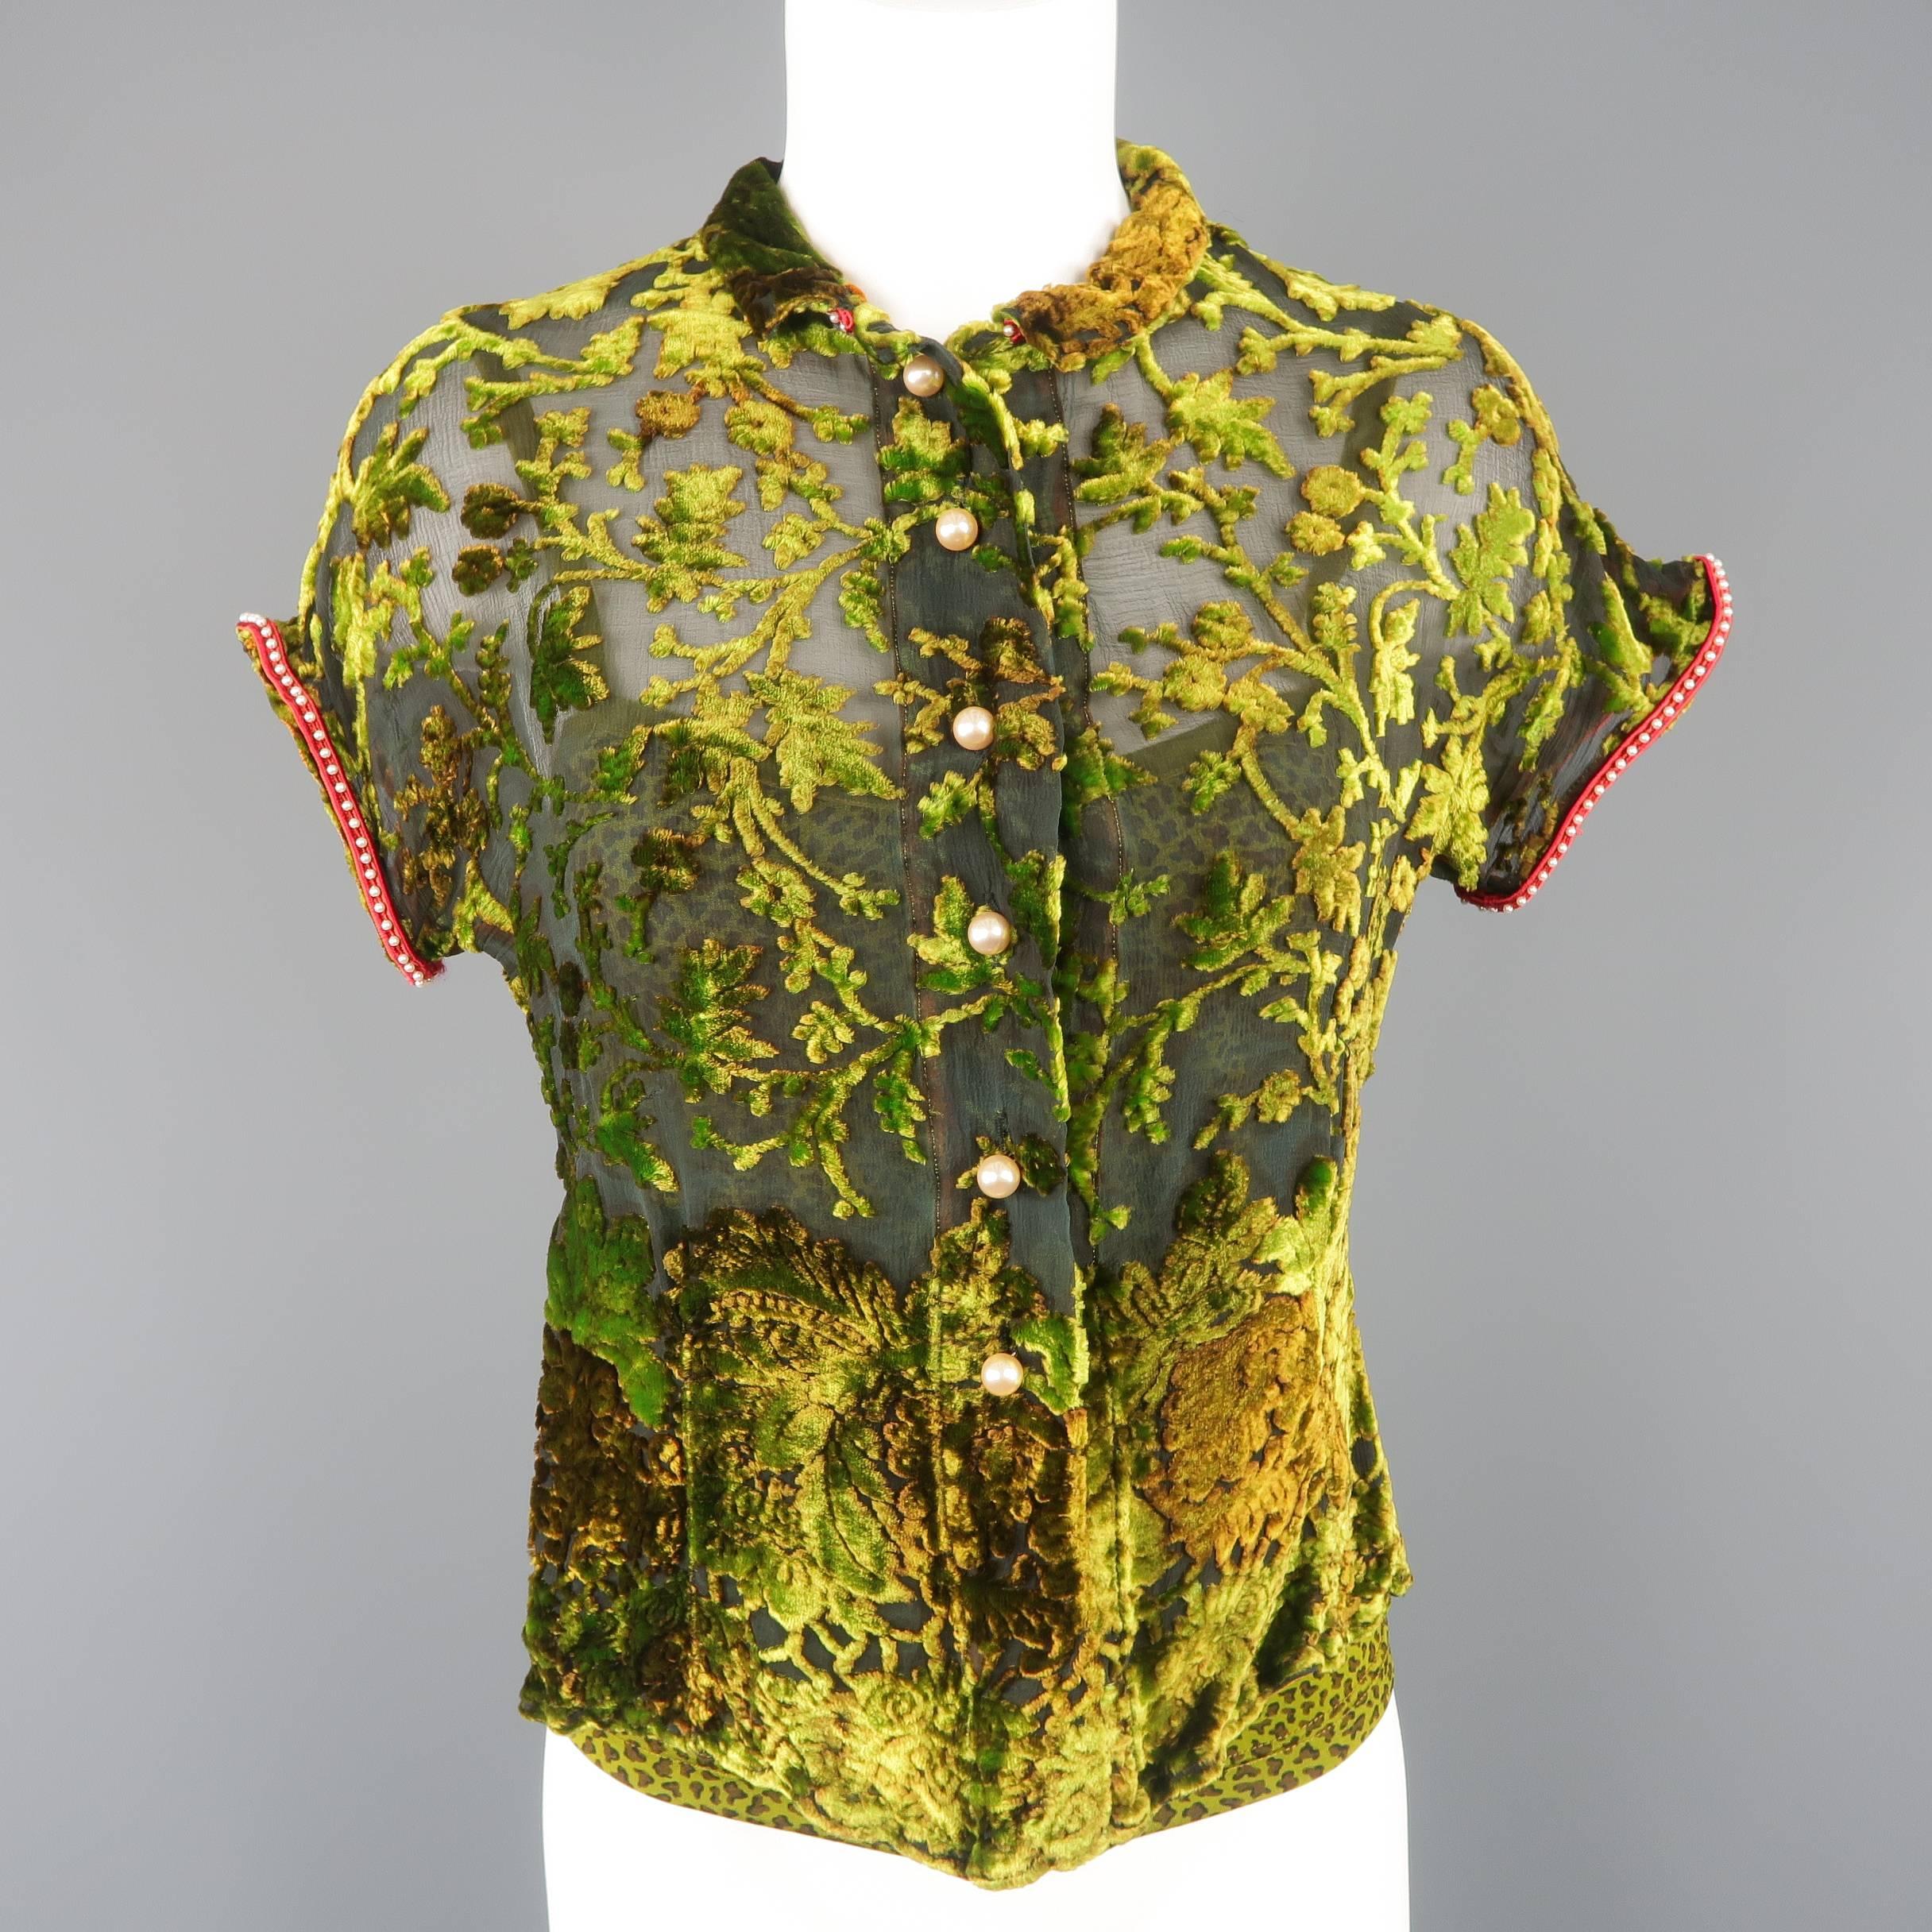 Vintage 1990's Voyage top comes in green velvet baroque print burnout velvet on silk chiffon with short sleeves, pointed collar, faux pearl buttons, and red faux pearl beaded trim with a stretch green cheetah print, velvet trimmed camisole. Made in